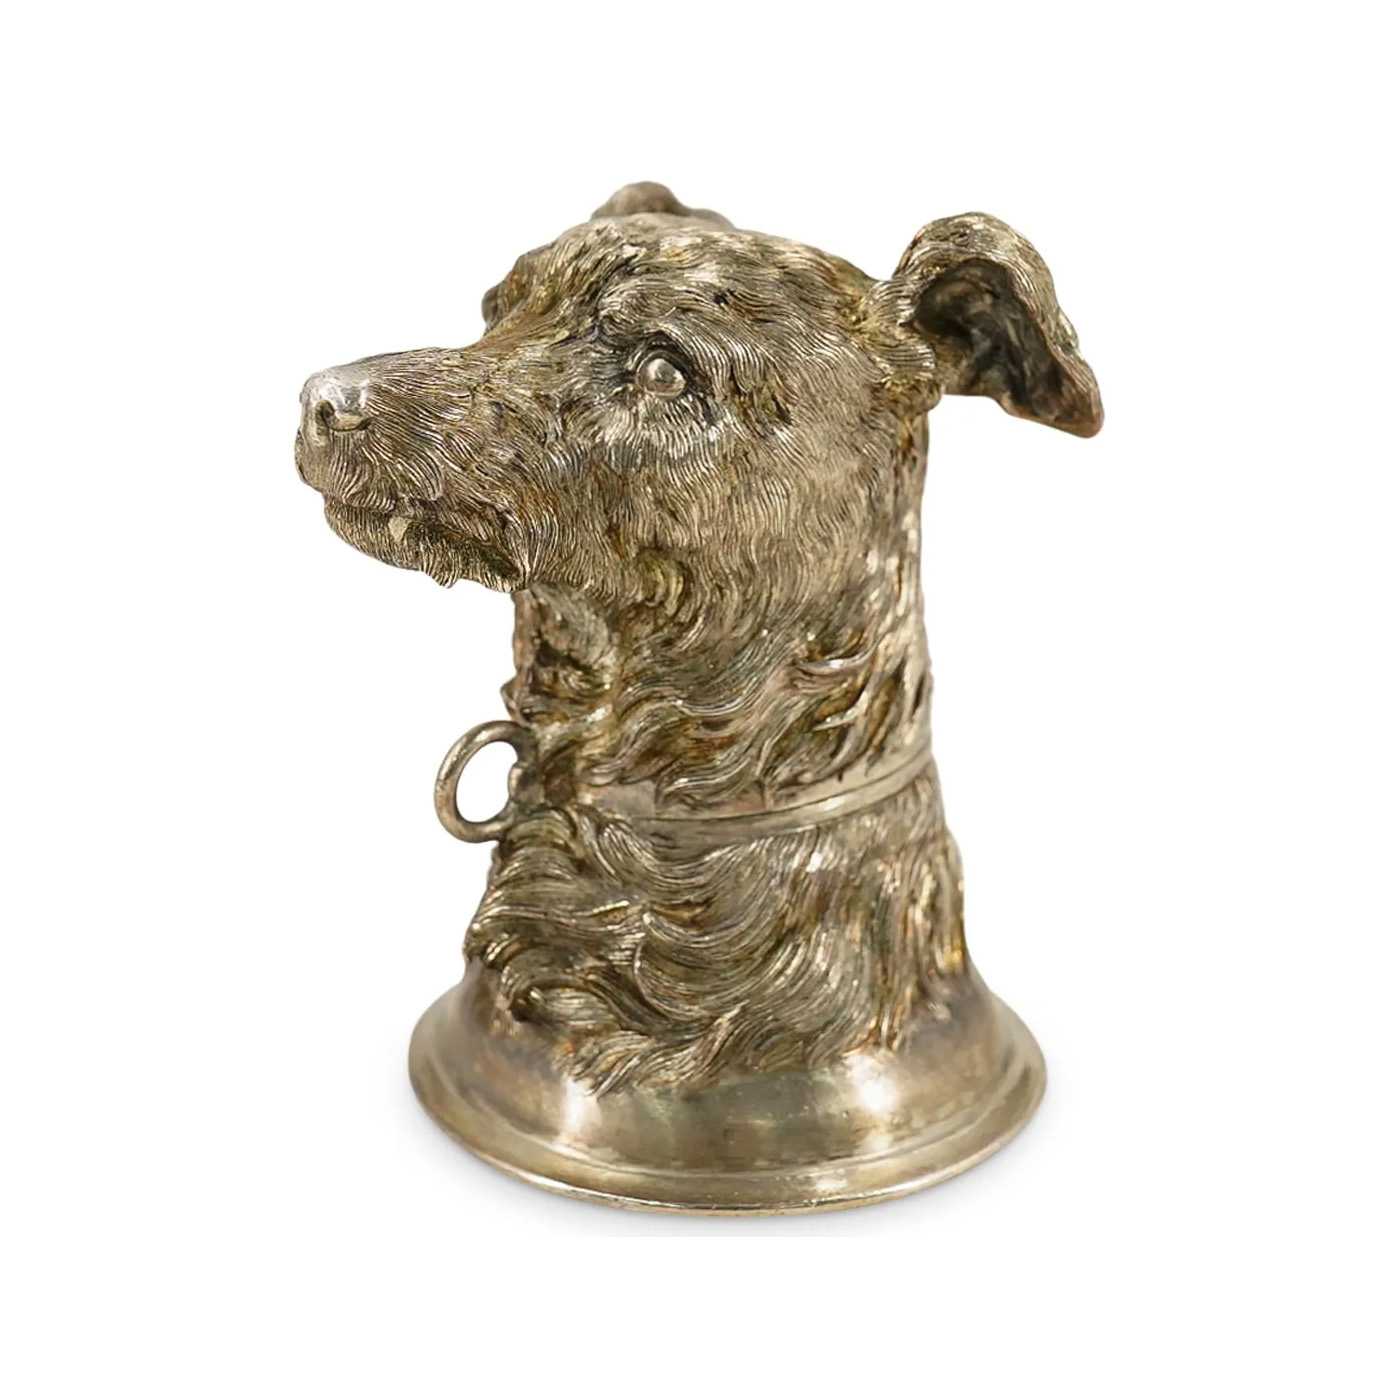 Russian 875 Silver Collared Dog Stirrup Cup, estimated at $2,000-$4,000 at Akiba.